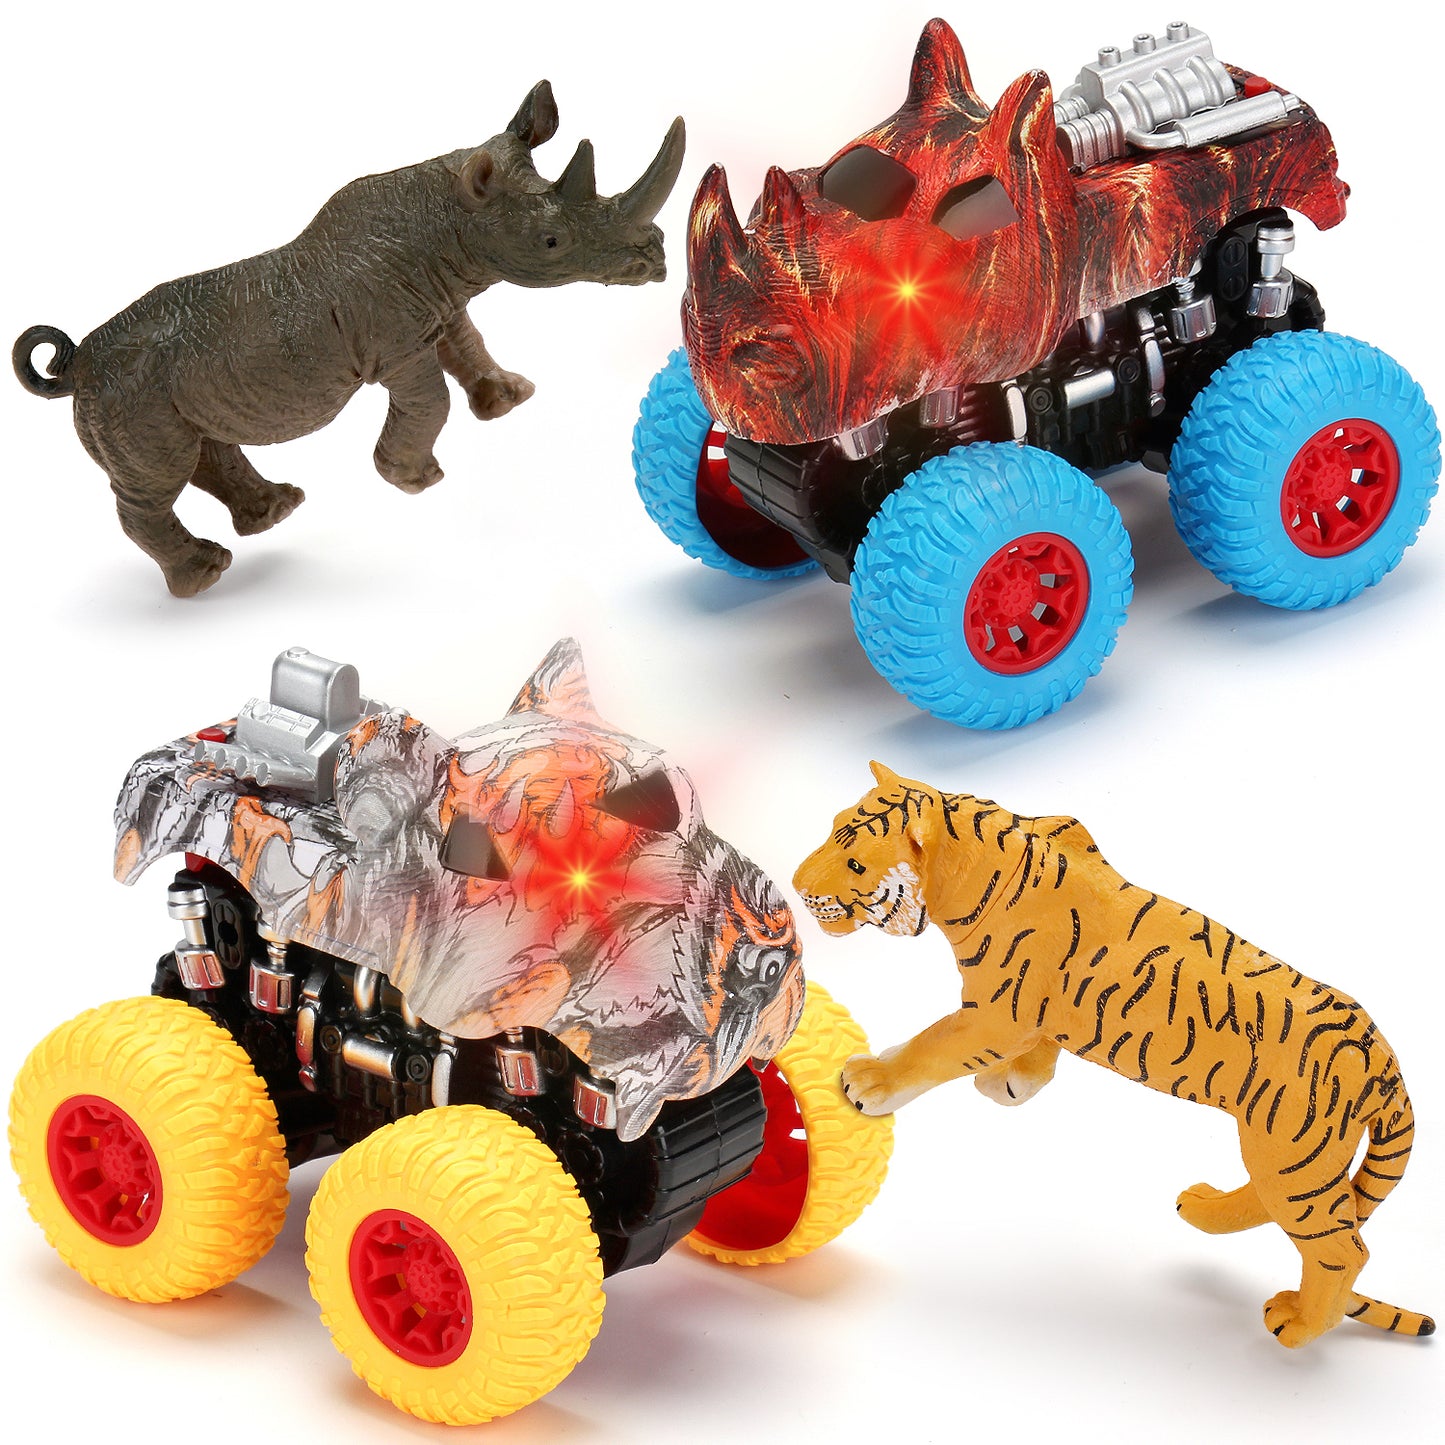 Monster Truck Toy Set - 2 Trucks + 2 Toy Animals | Push and Go Toys for Boys and Girls